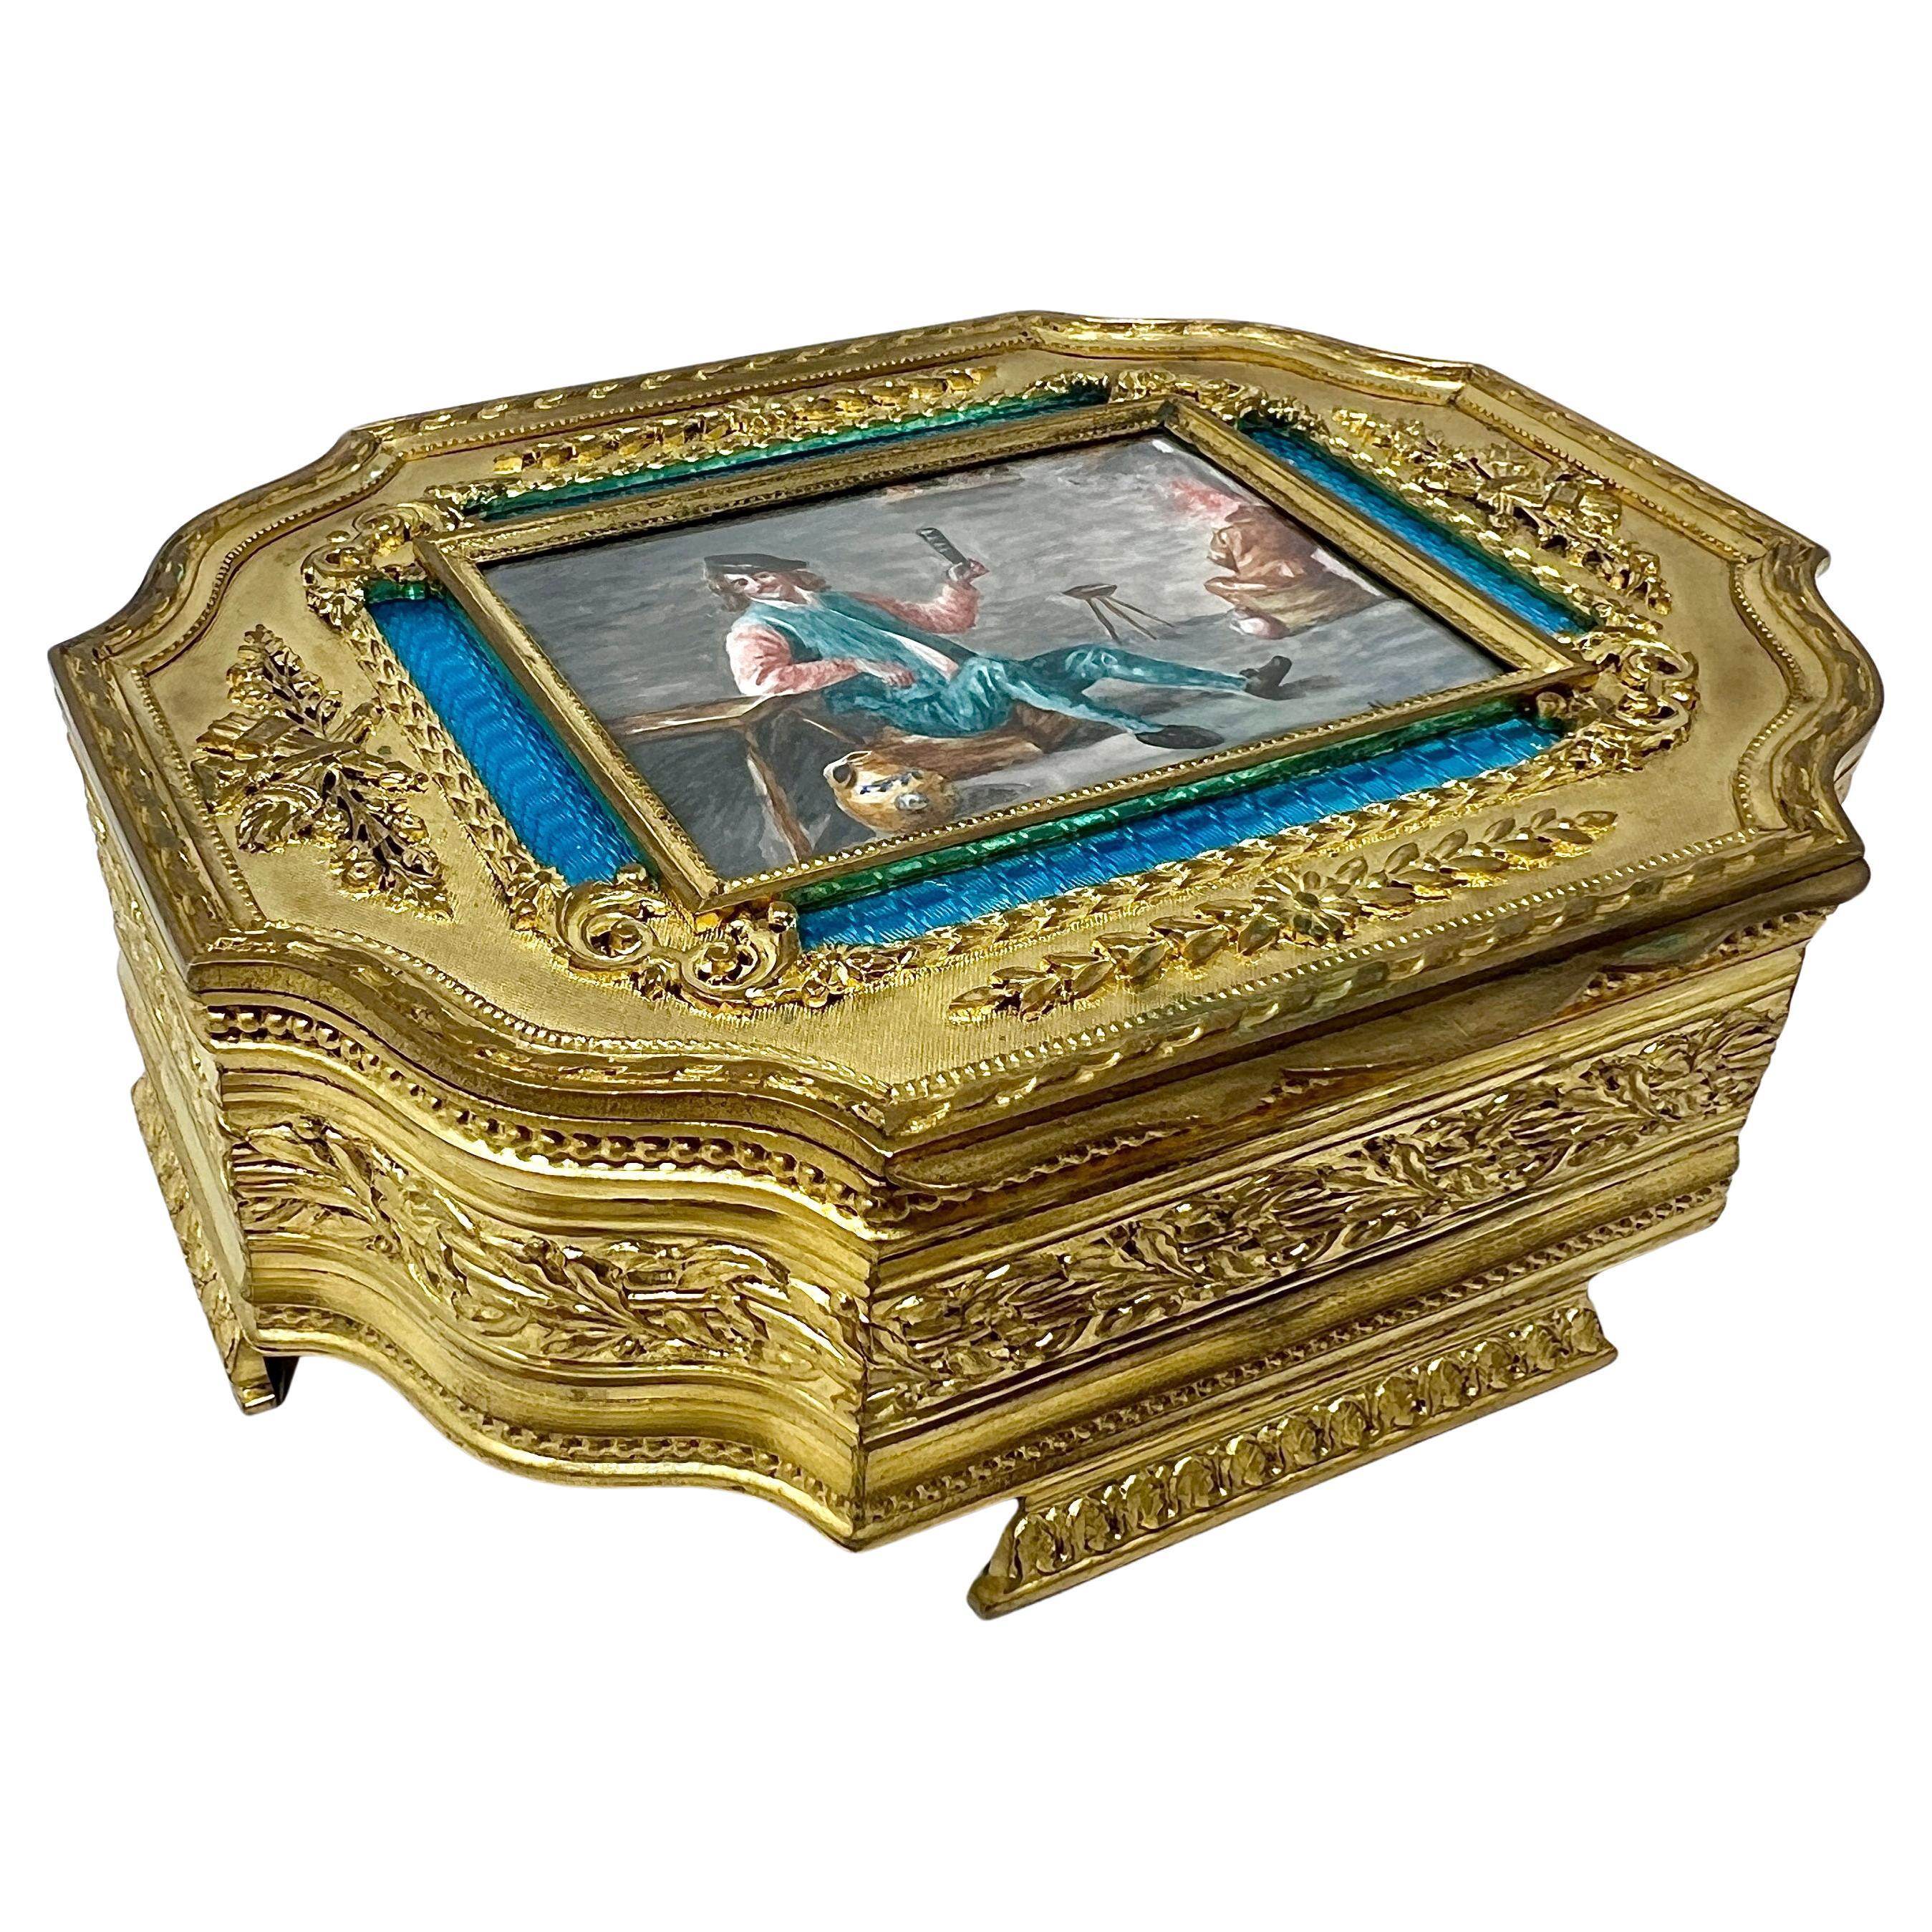 Antique French Blue Enameled Porcelain and Gold Bronze Jewel Box, Circa 1910.